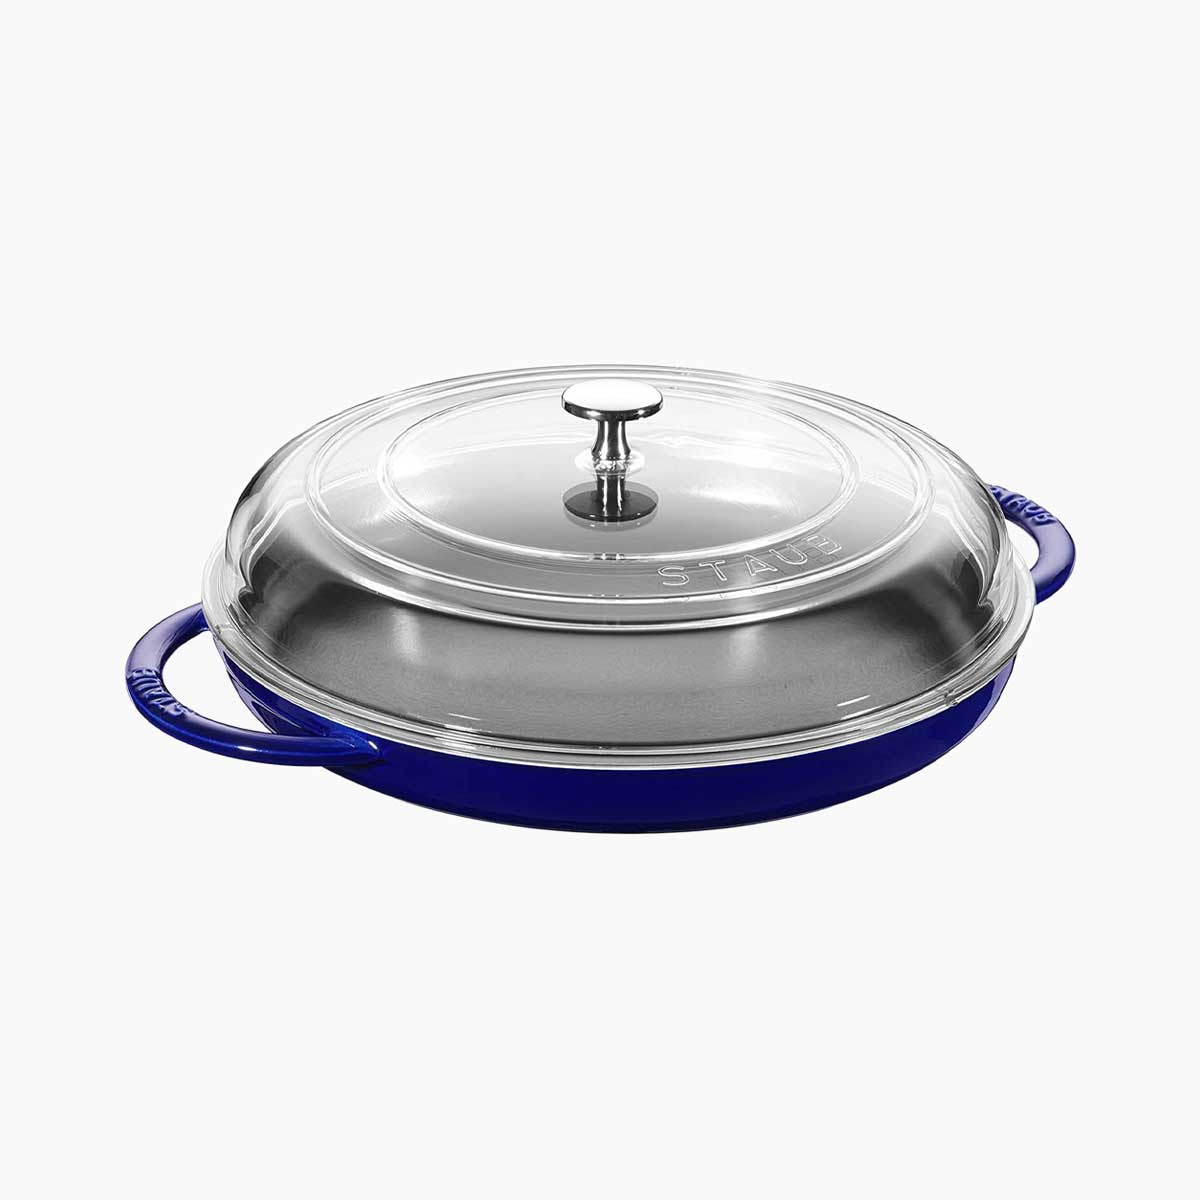 A Staub cast iron griddle with lid, which is one of the pasta queen's favorite things.